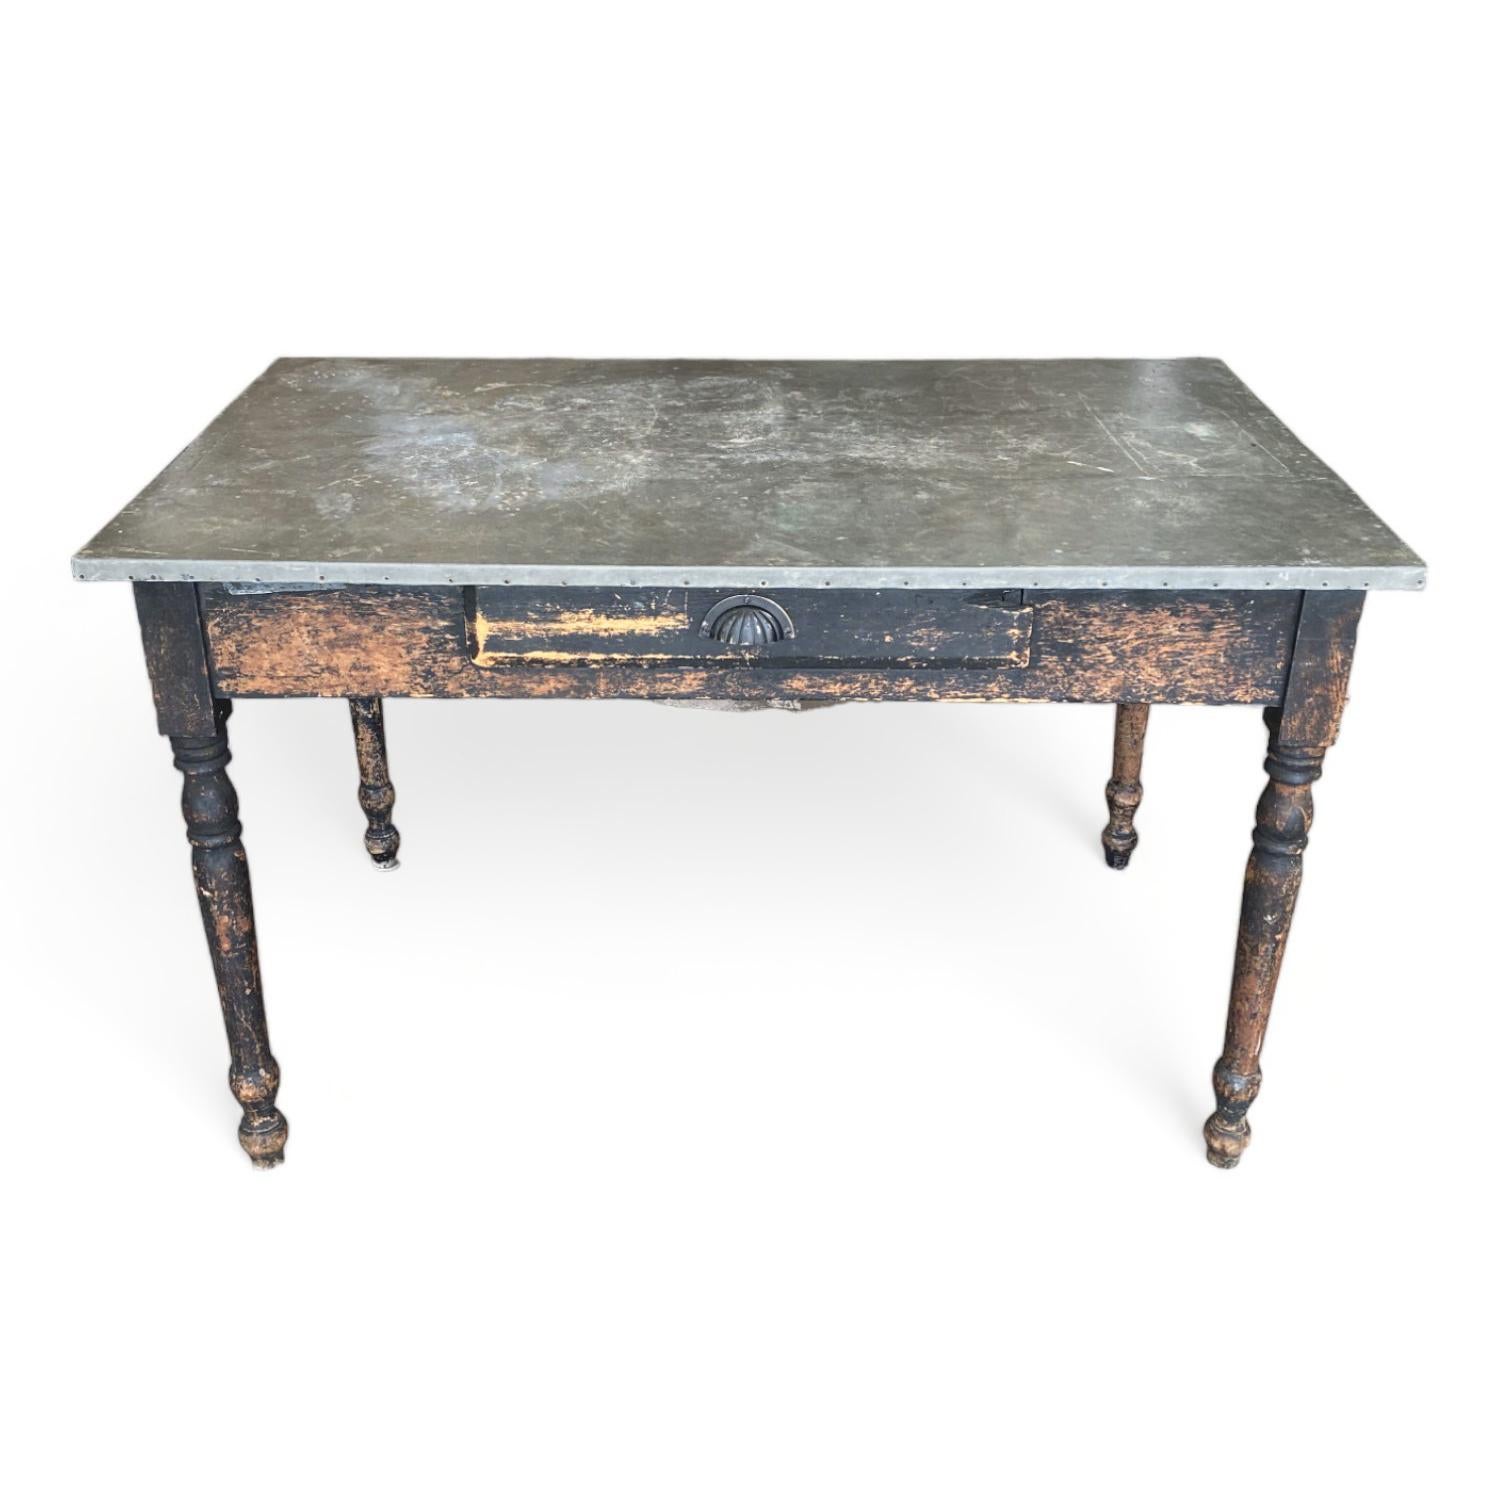 This unique writing desk is a rare find. The galvanized metal surface adds an industrial edge to a rustic American style. The unique surface provides a durable and practical workspace and with an added drawer, it would function perfectly for a